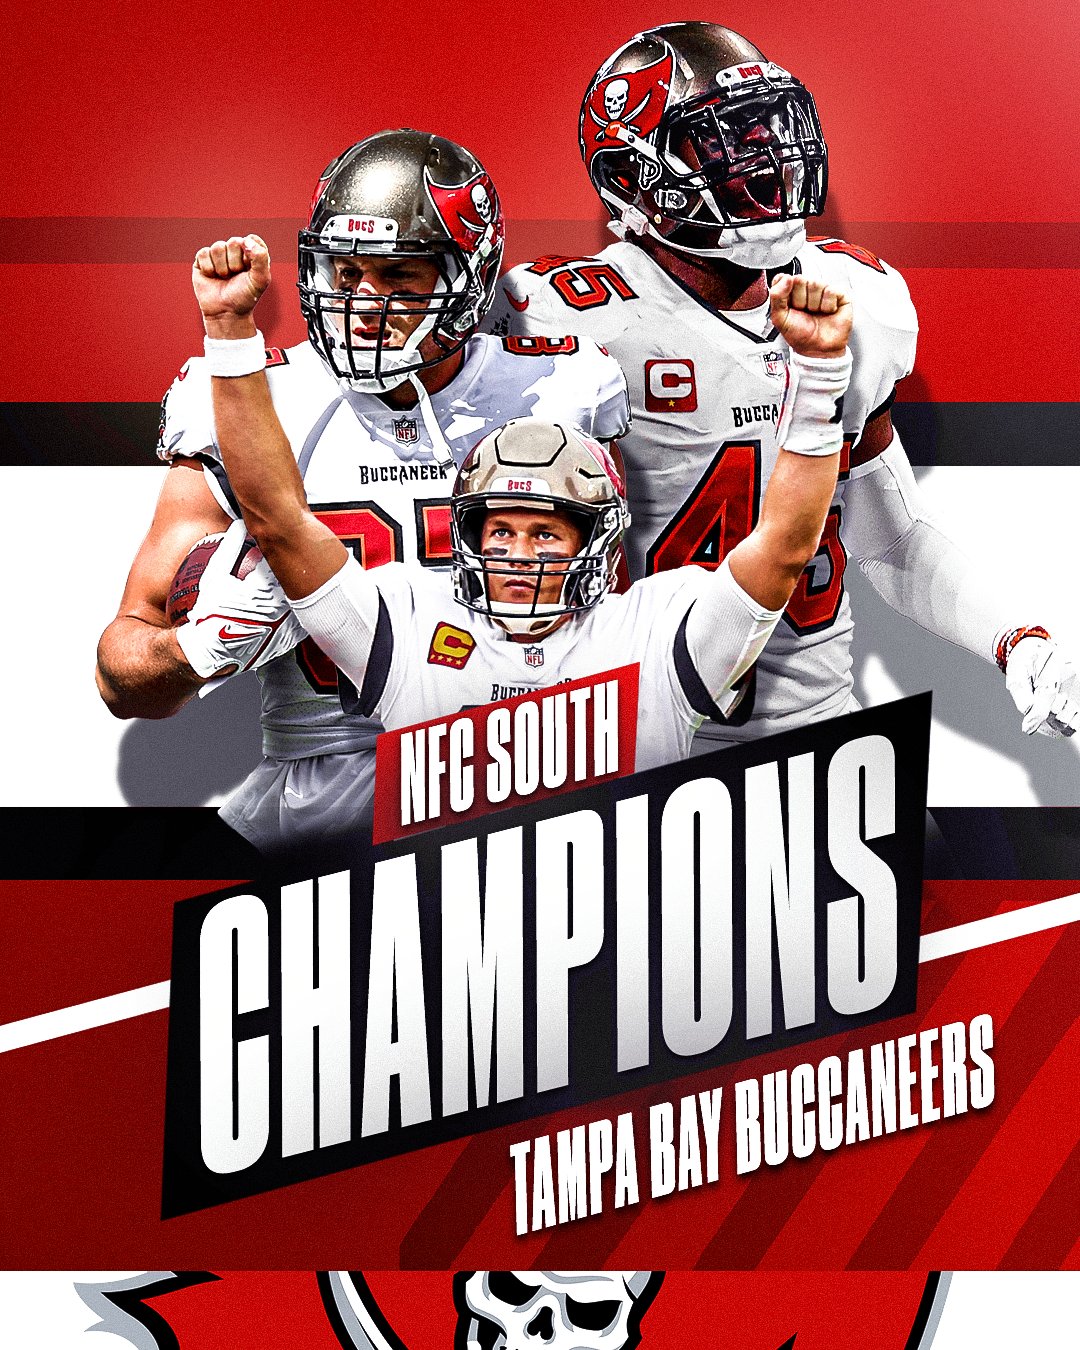 tampa bay buccaneers nfc south